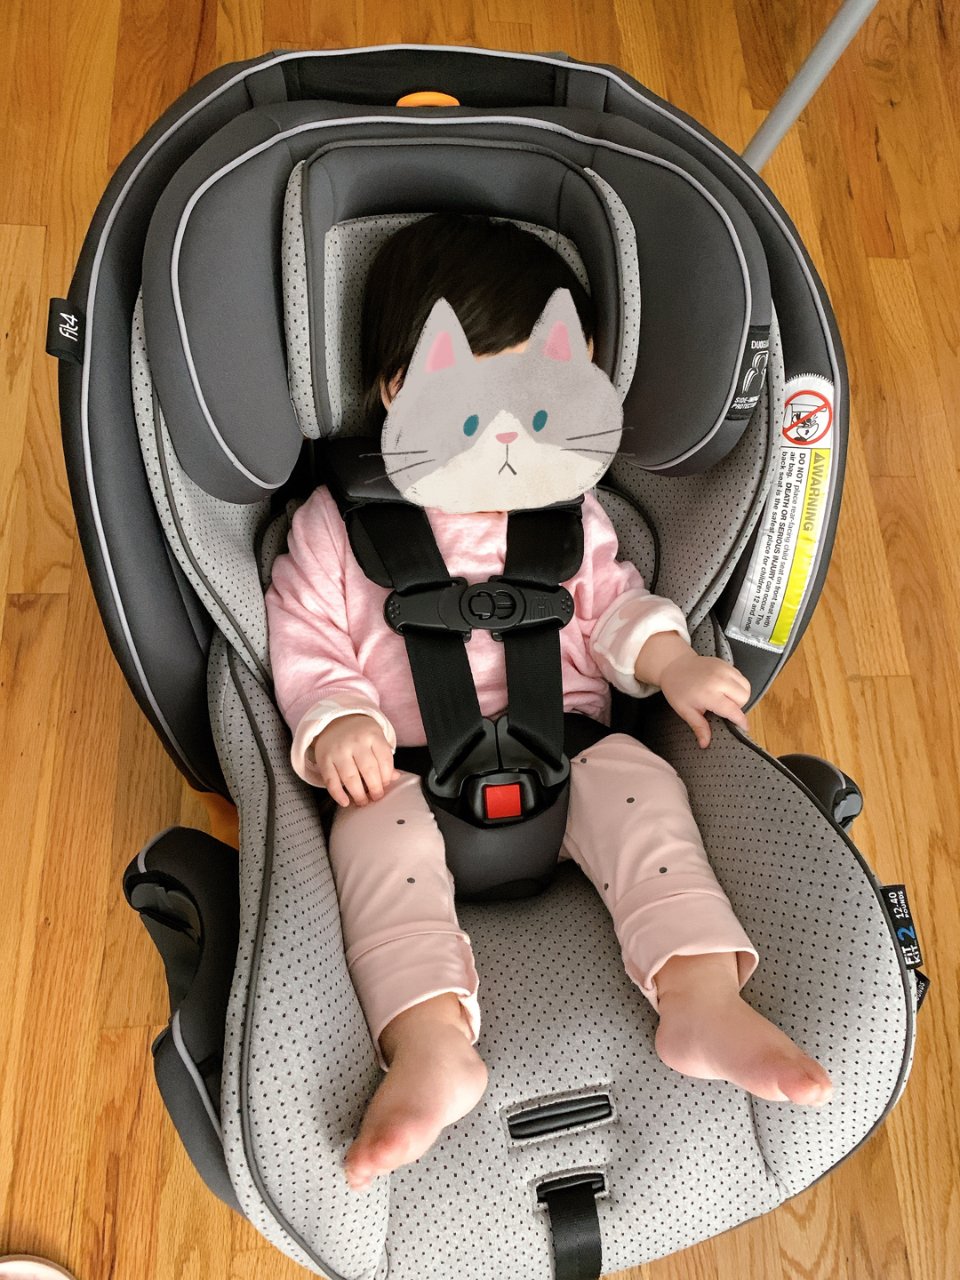 Chicco fit4 car seat